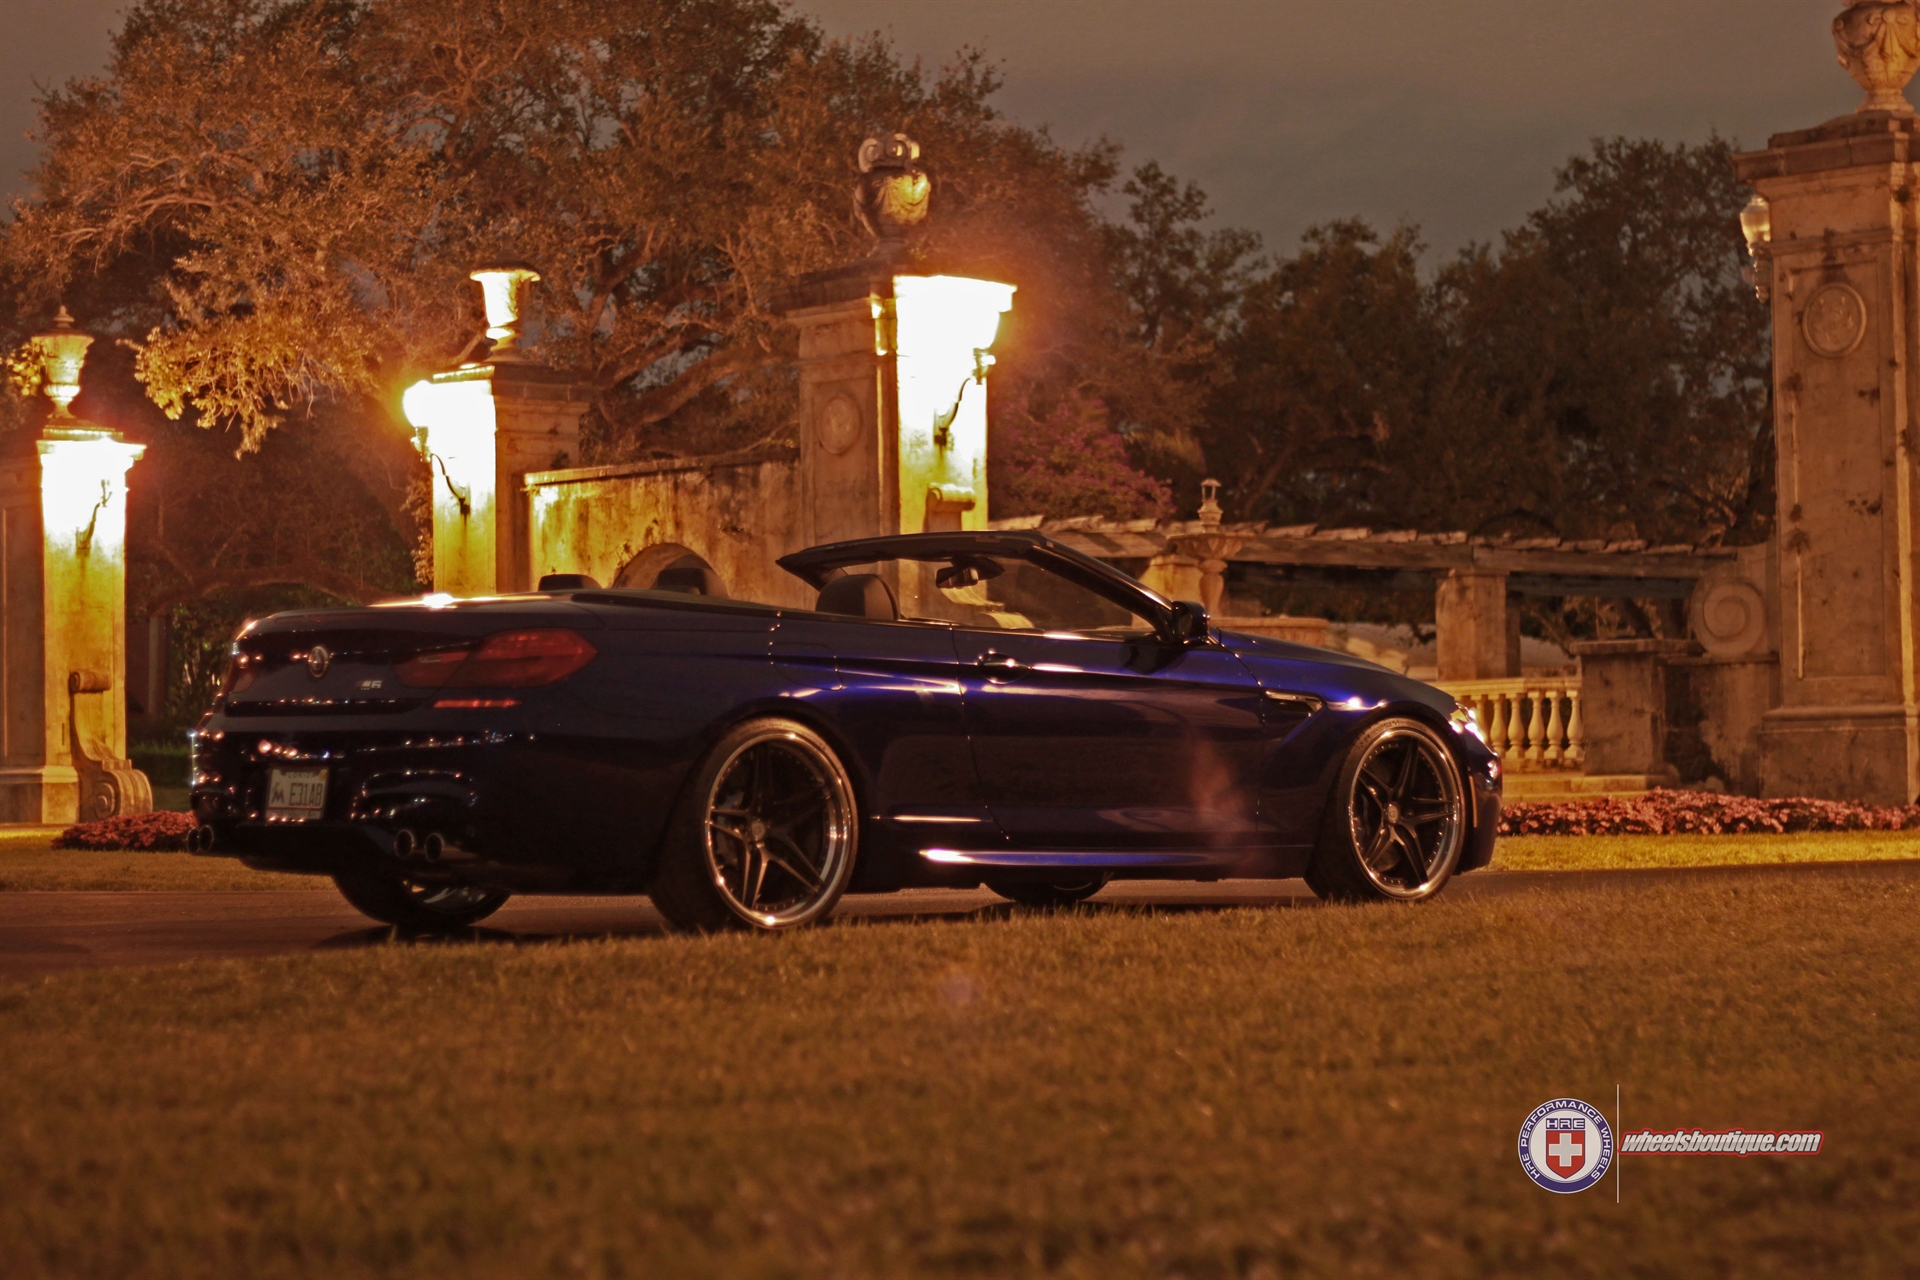 BMW M6 Convertible HRE S107